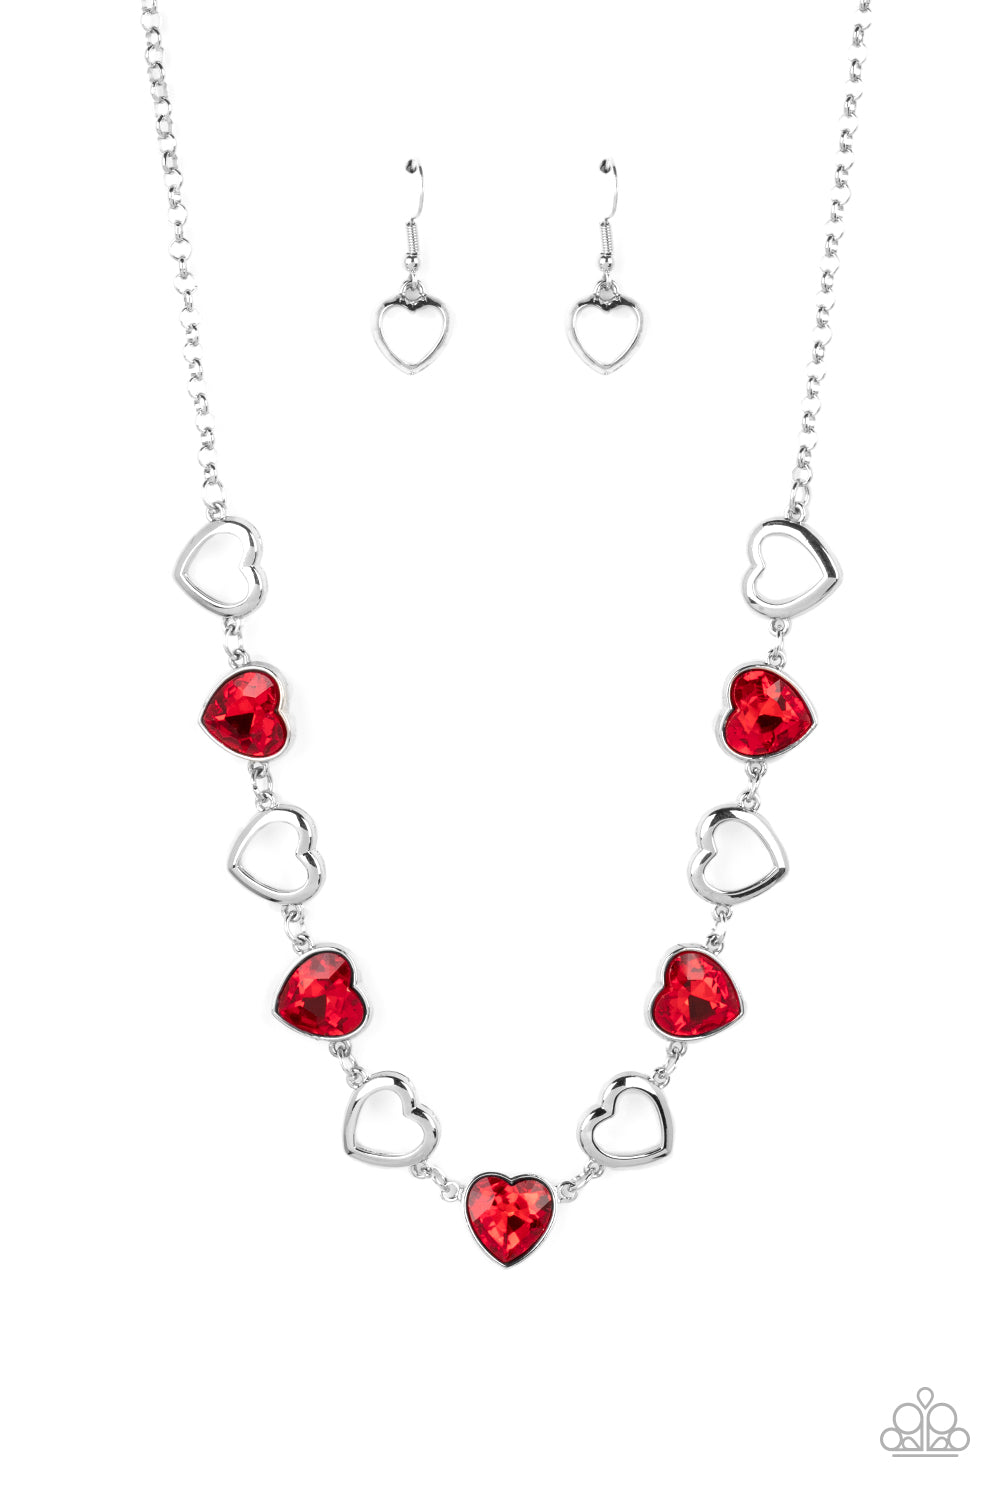 Contemporary Cupid - Red Heart Necklace - Paparazzi Accessories - Shiny, silver silhouette hearts alternate between faceted red heart gems pressed into silver frames.The high-sheen and sparkly display coalesce around the collar for a cupid-like charm.